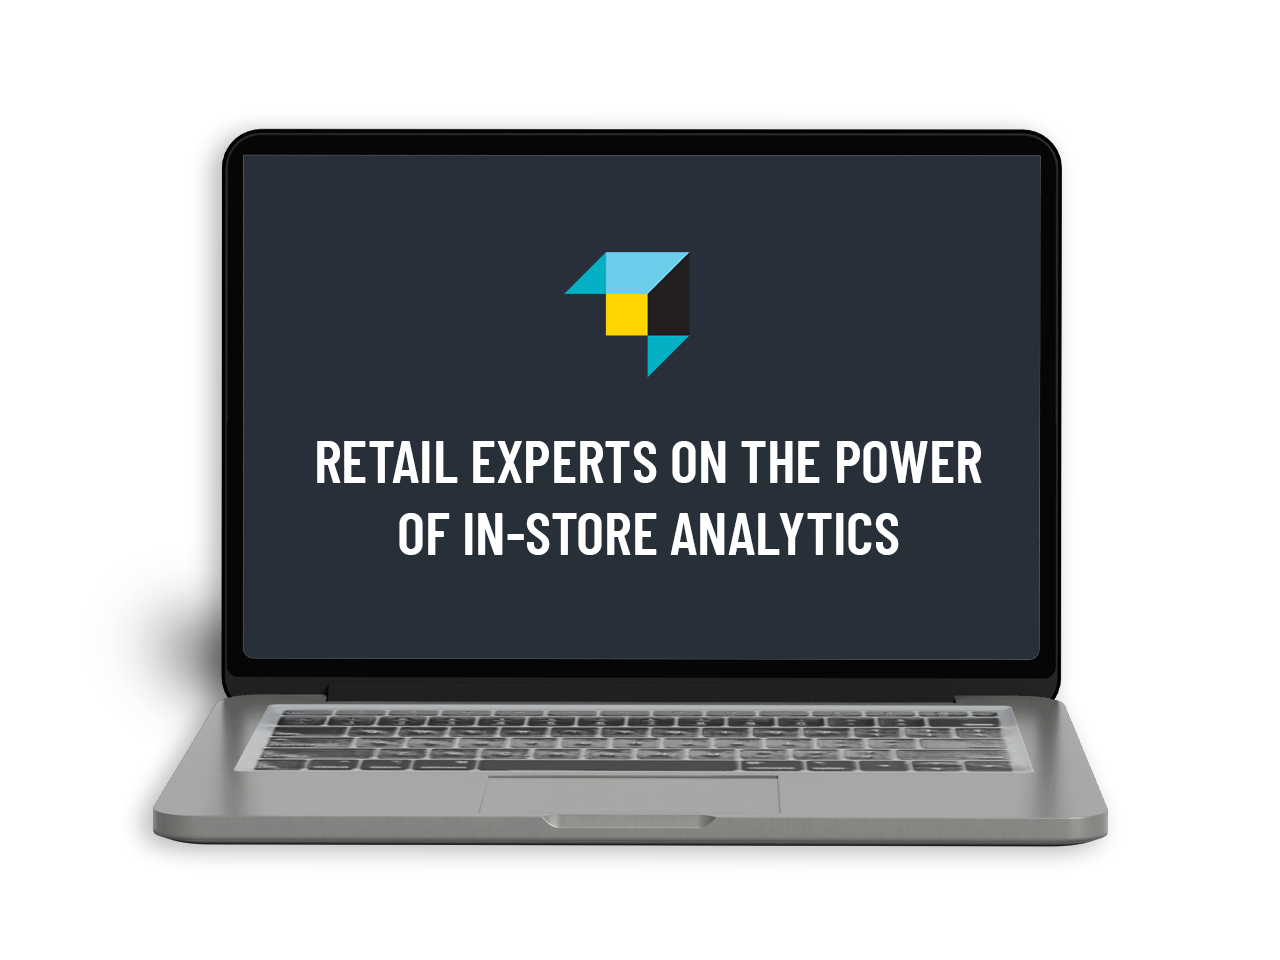 LAPTOP - Retail Experts On The Power Of In-Store Analytics